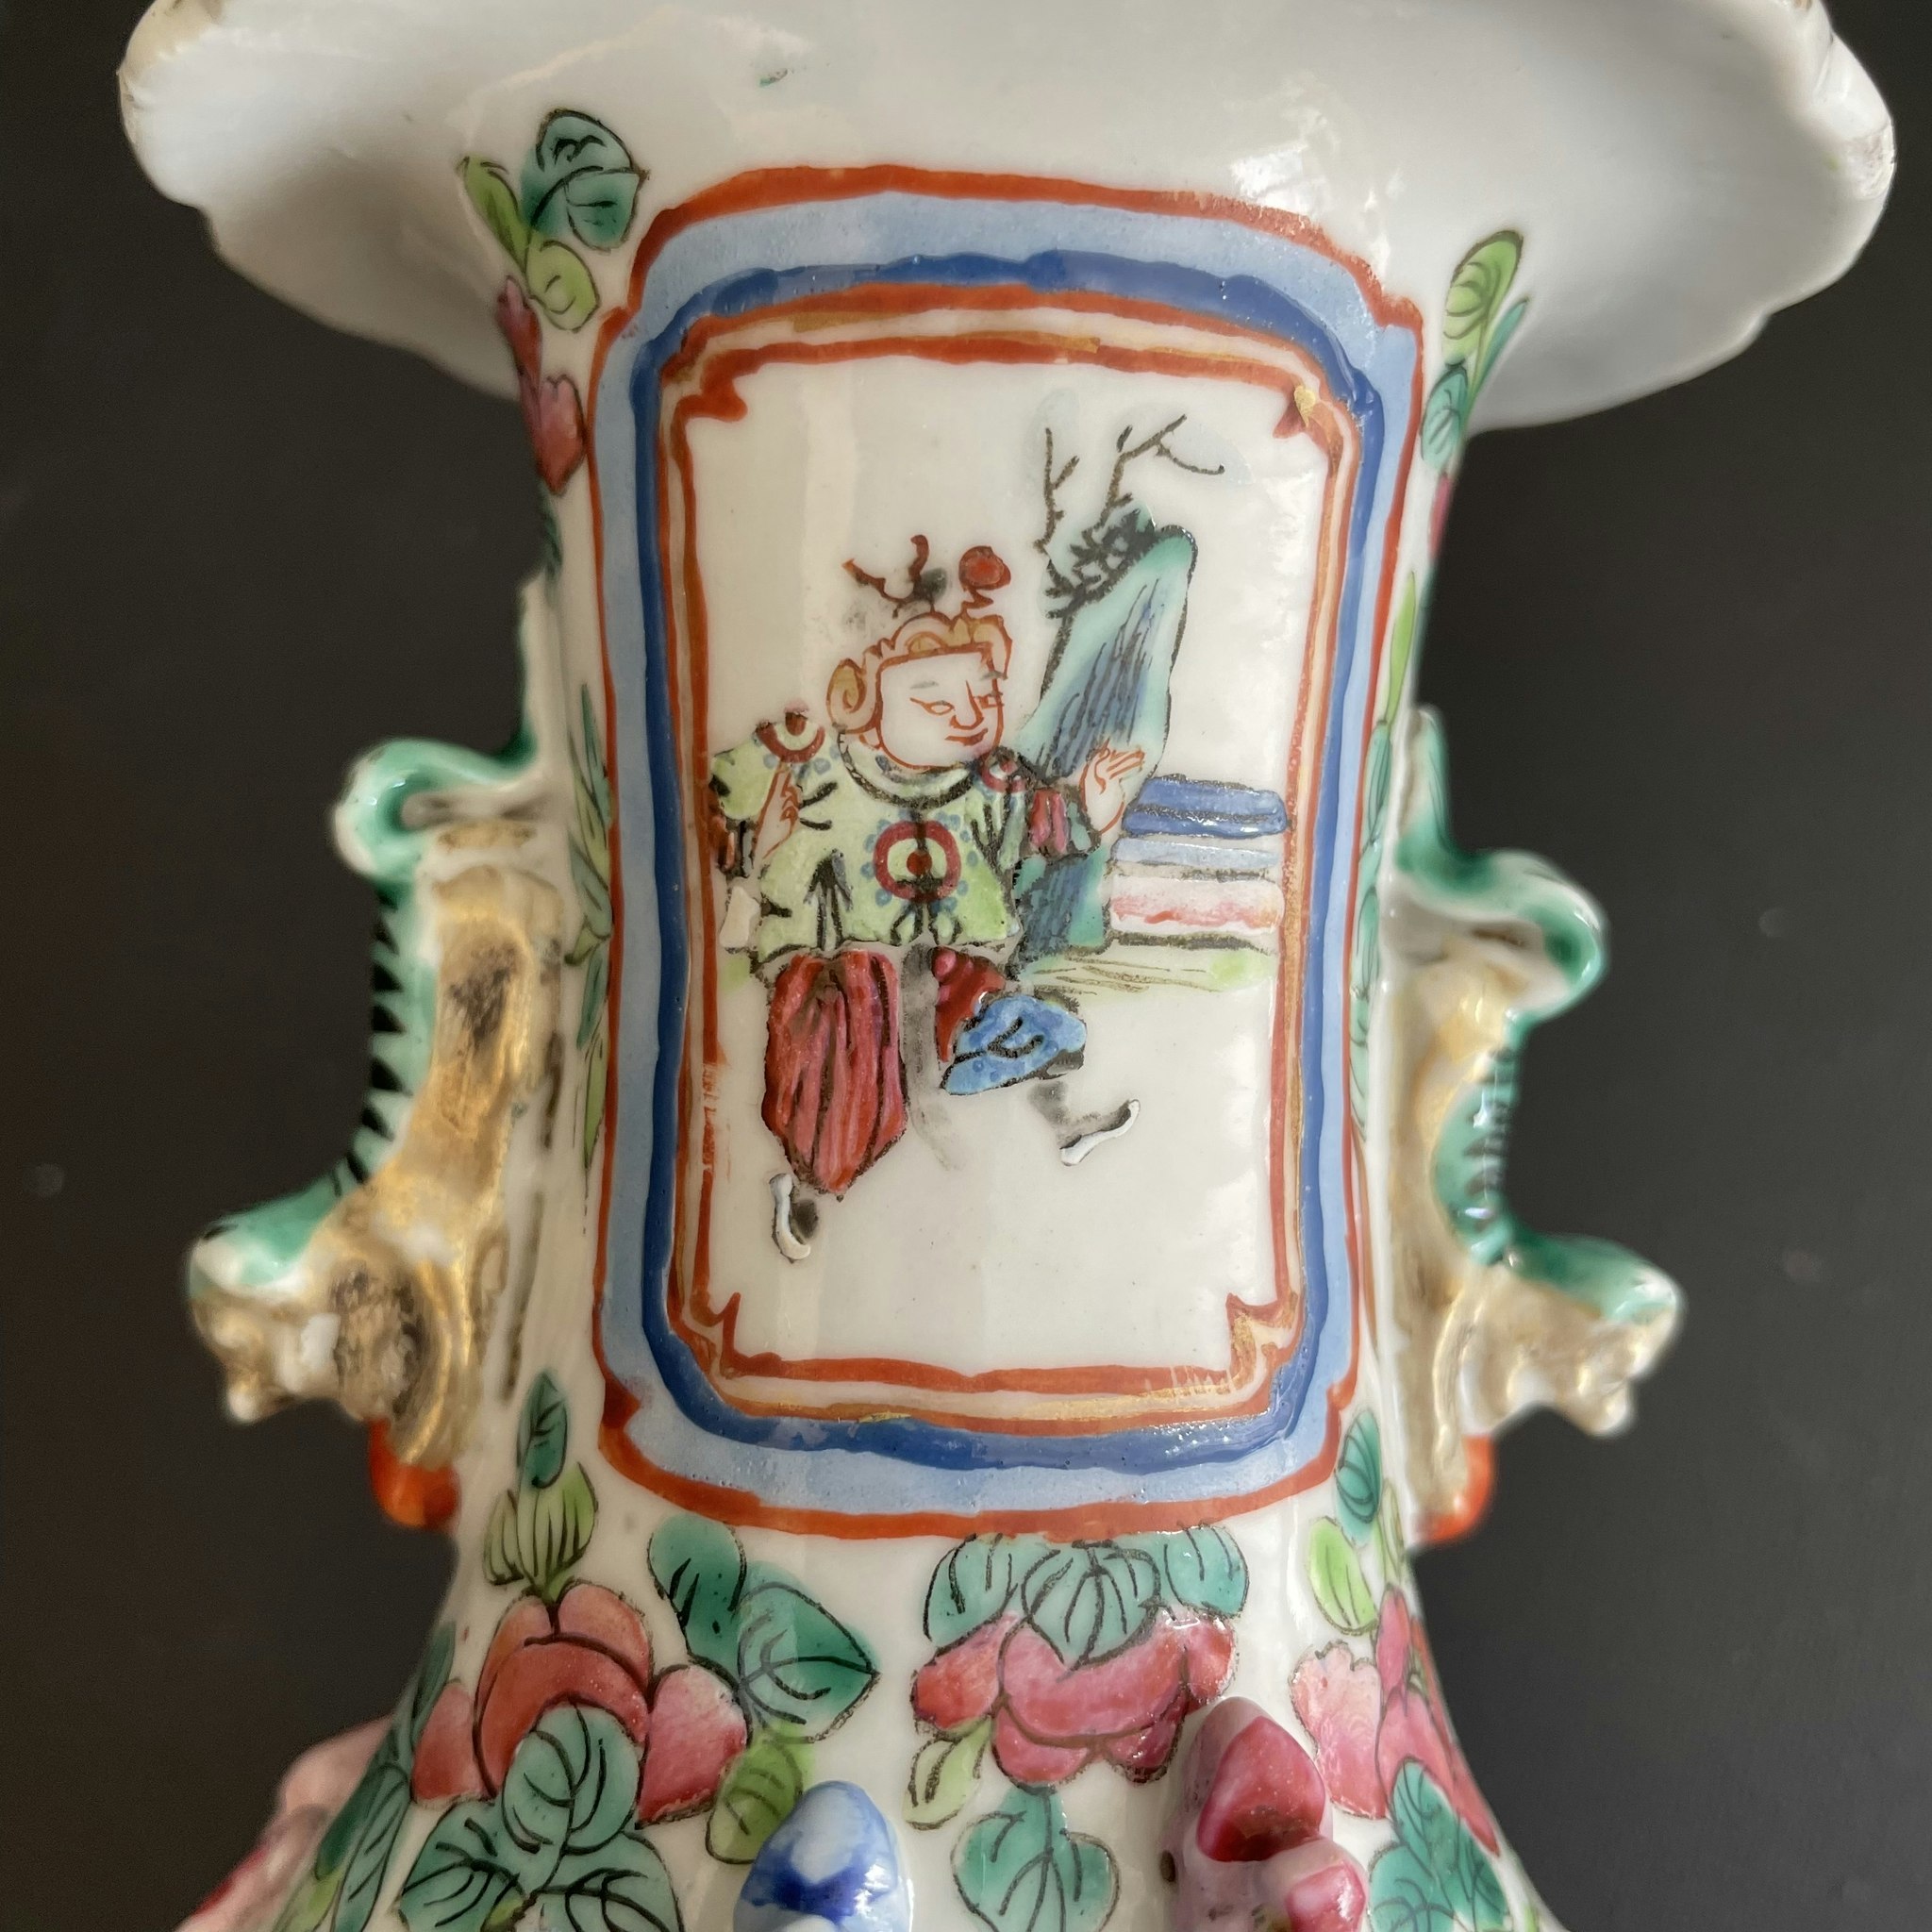 Chinese Antique porcelain vase, Late Qing Dynasty #1610